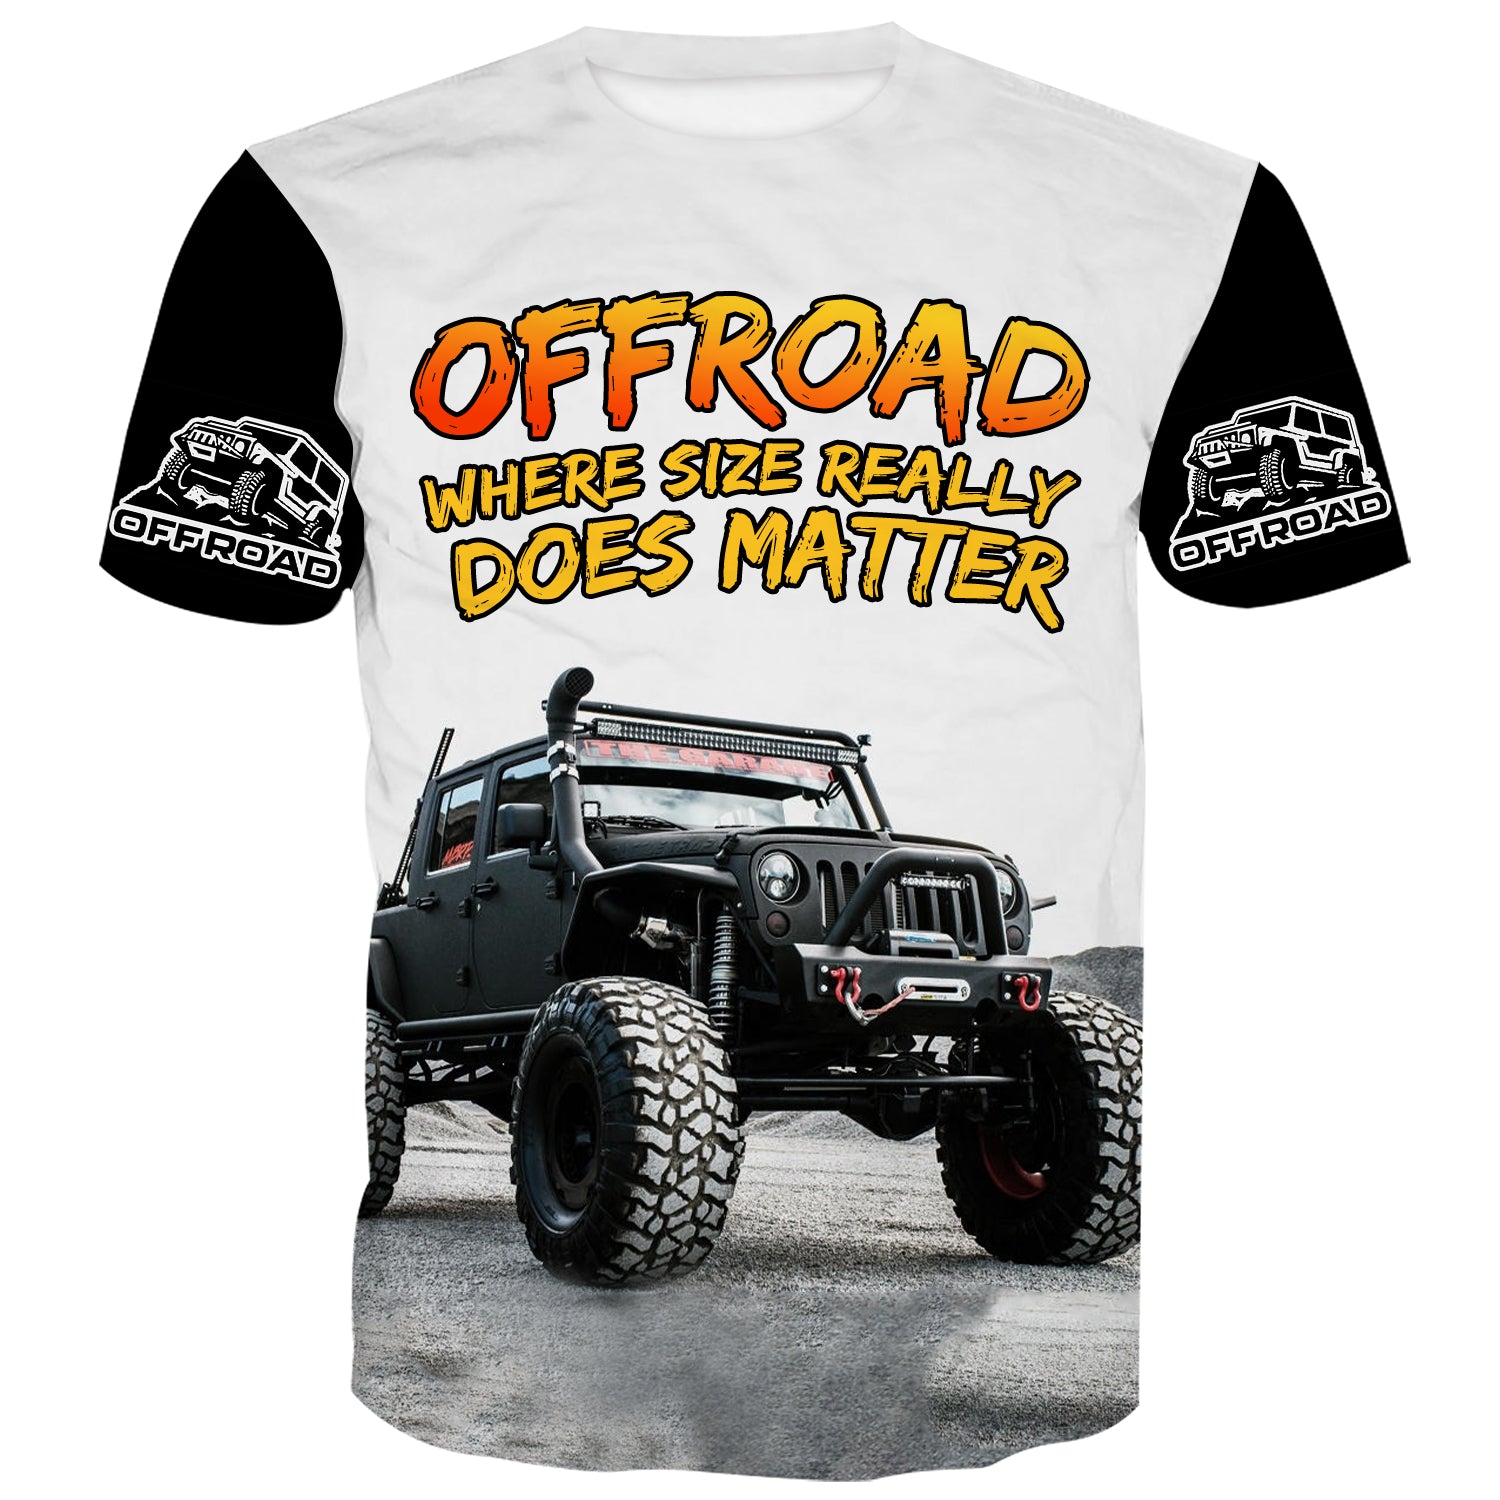 OffRoad Where size really does matter - T-Shirt